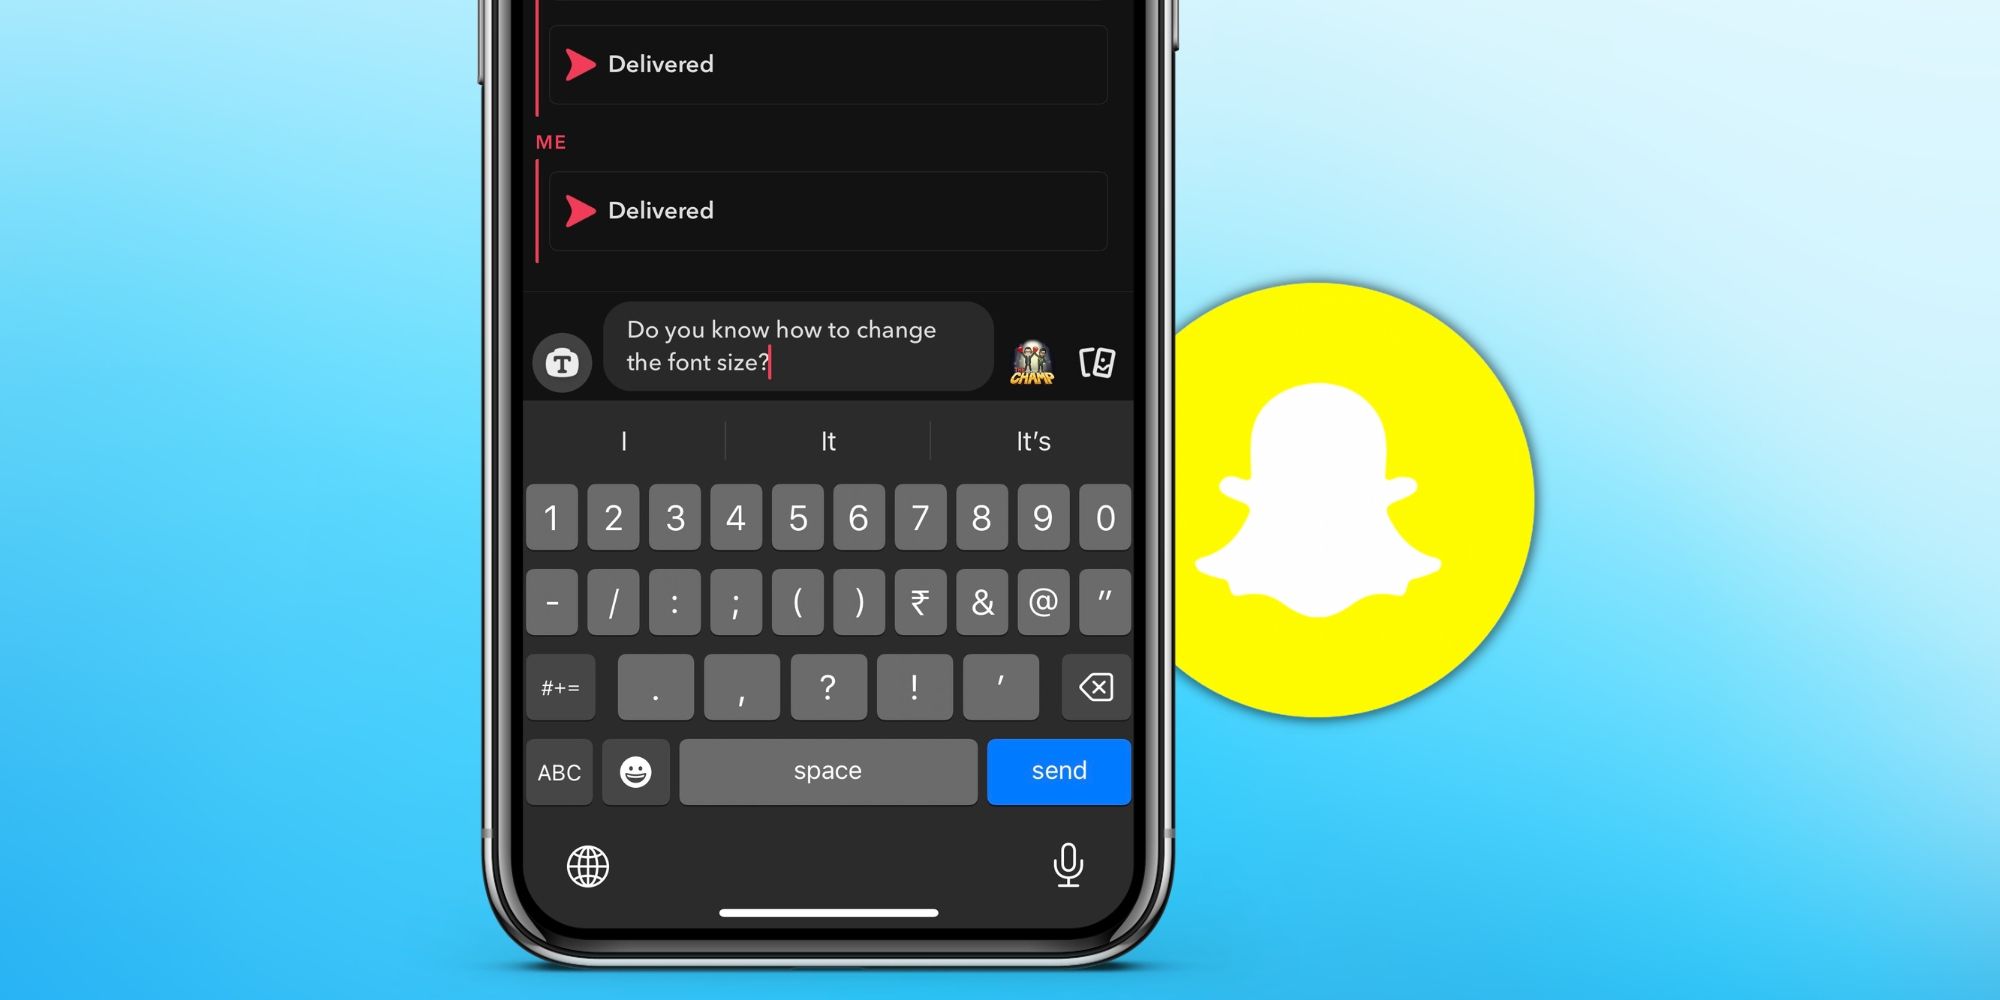 Screenshot of a Snapchat chat with the app's logo on a blue gradient background